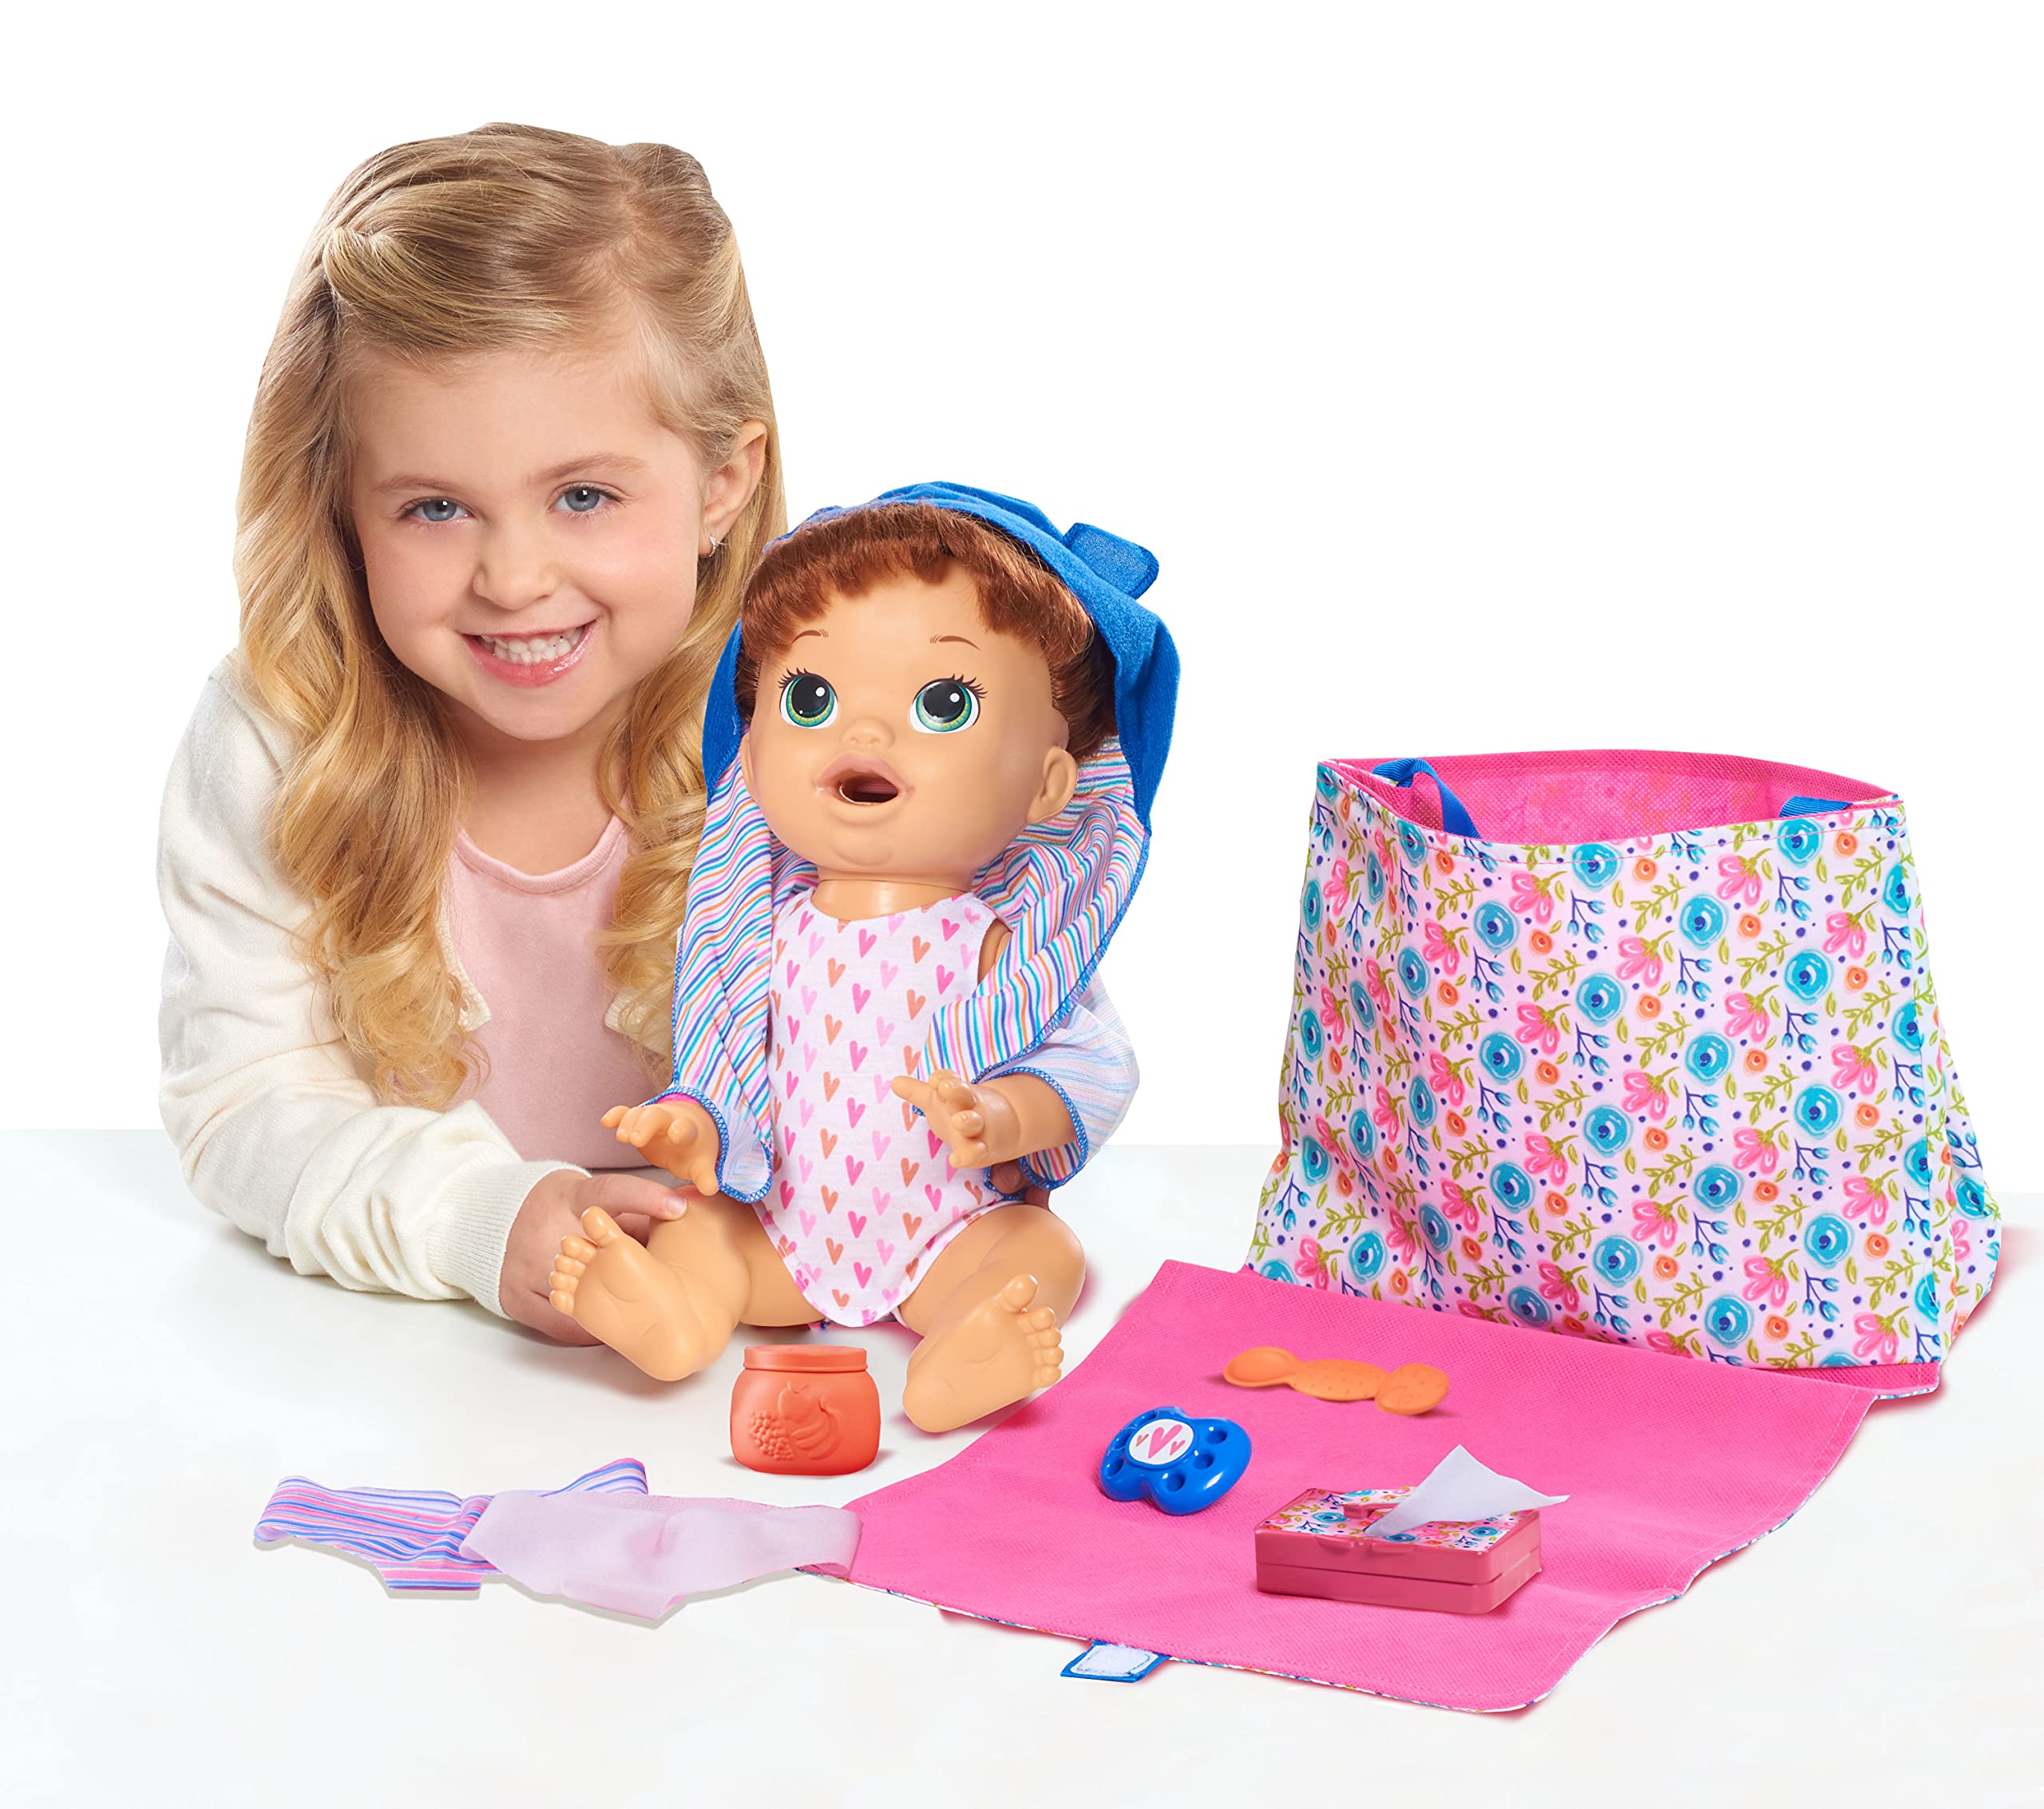 Baby Alive New Mommy Kit, Kids Toys for Ages 3 Up, Gifts and Presents by Just Play